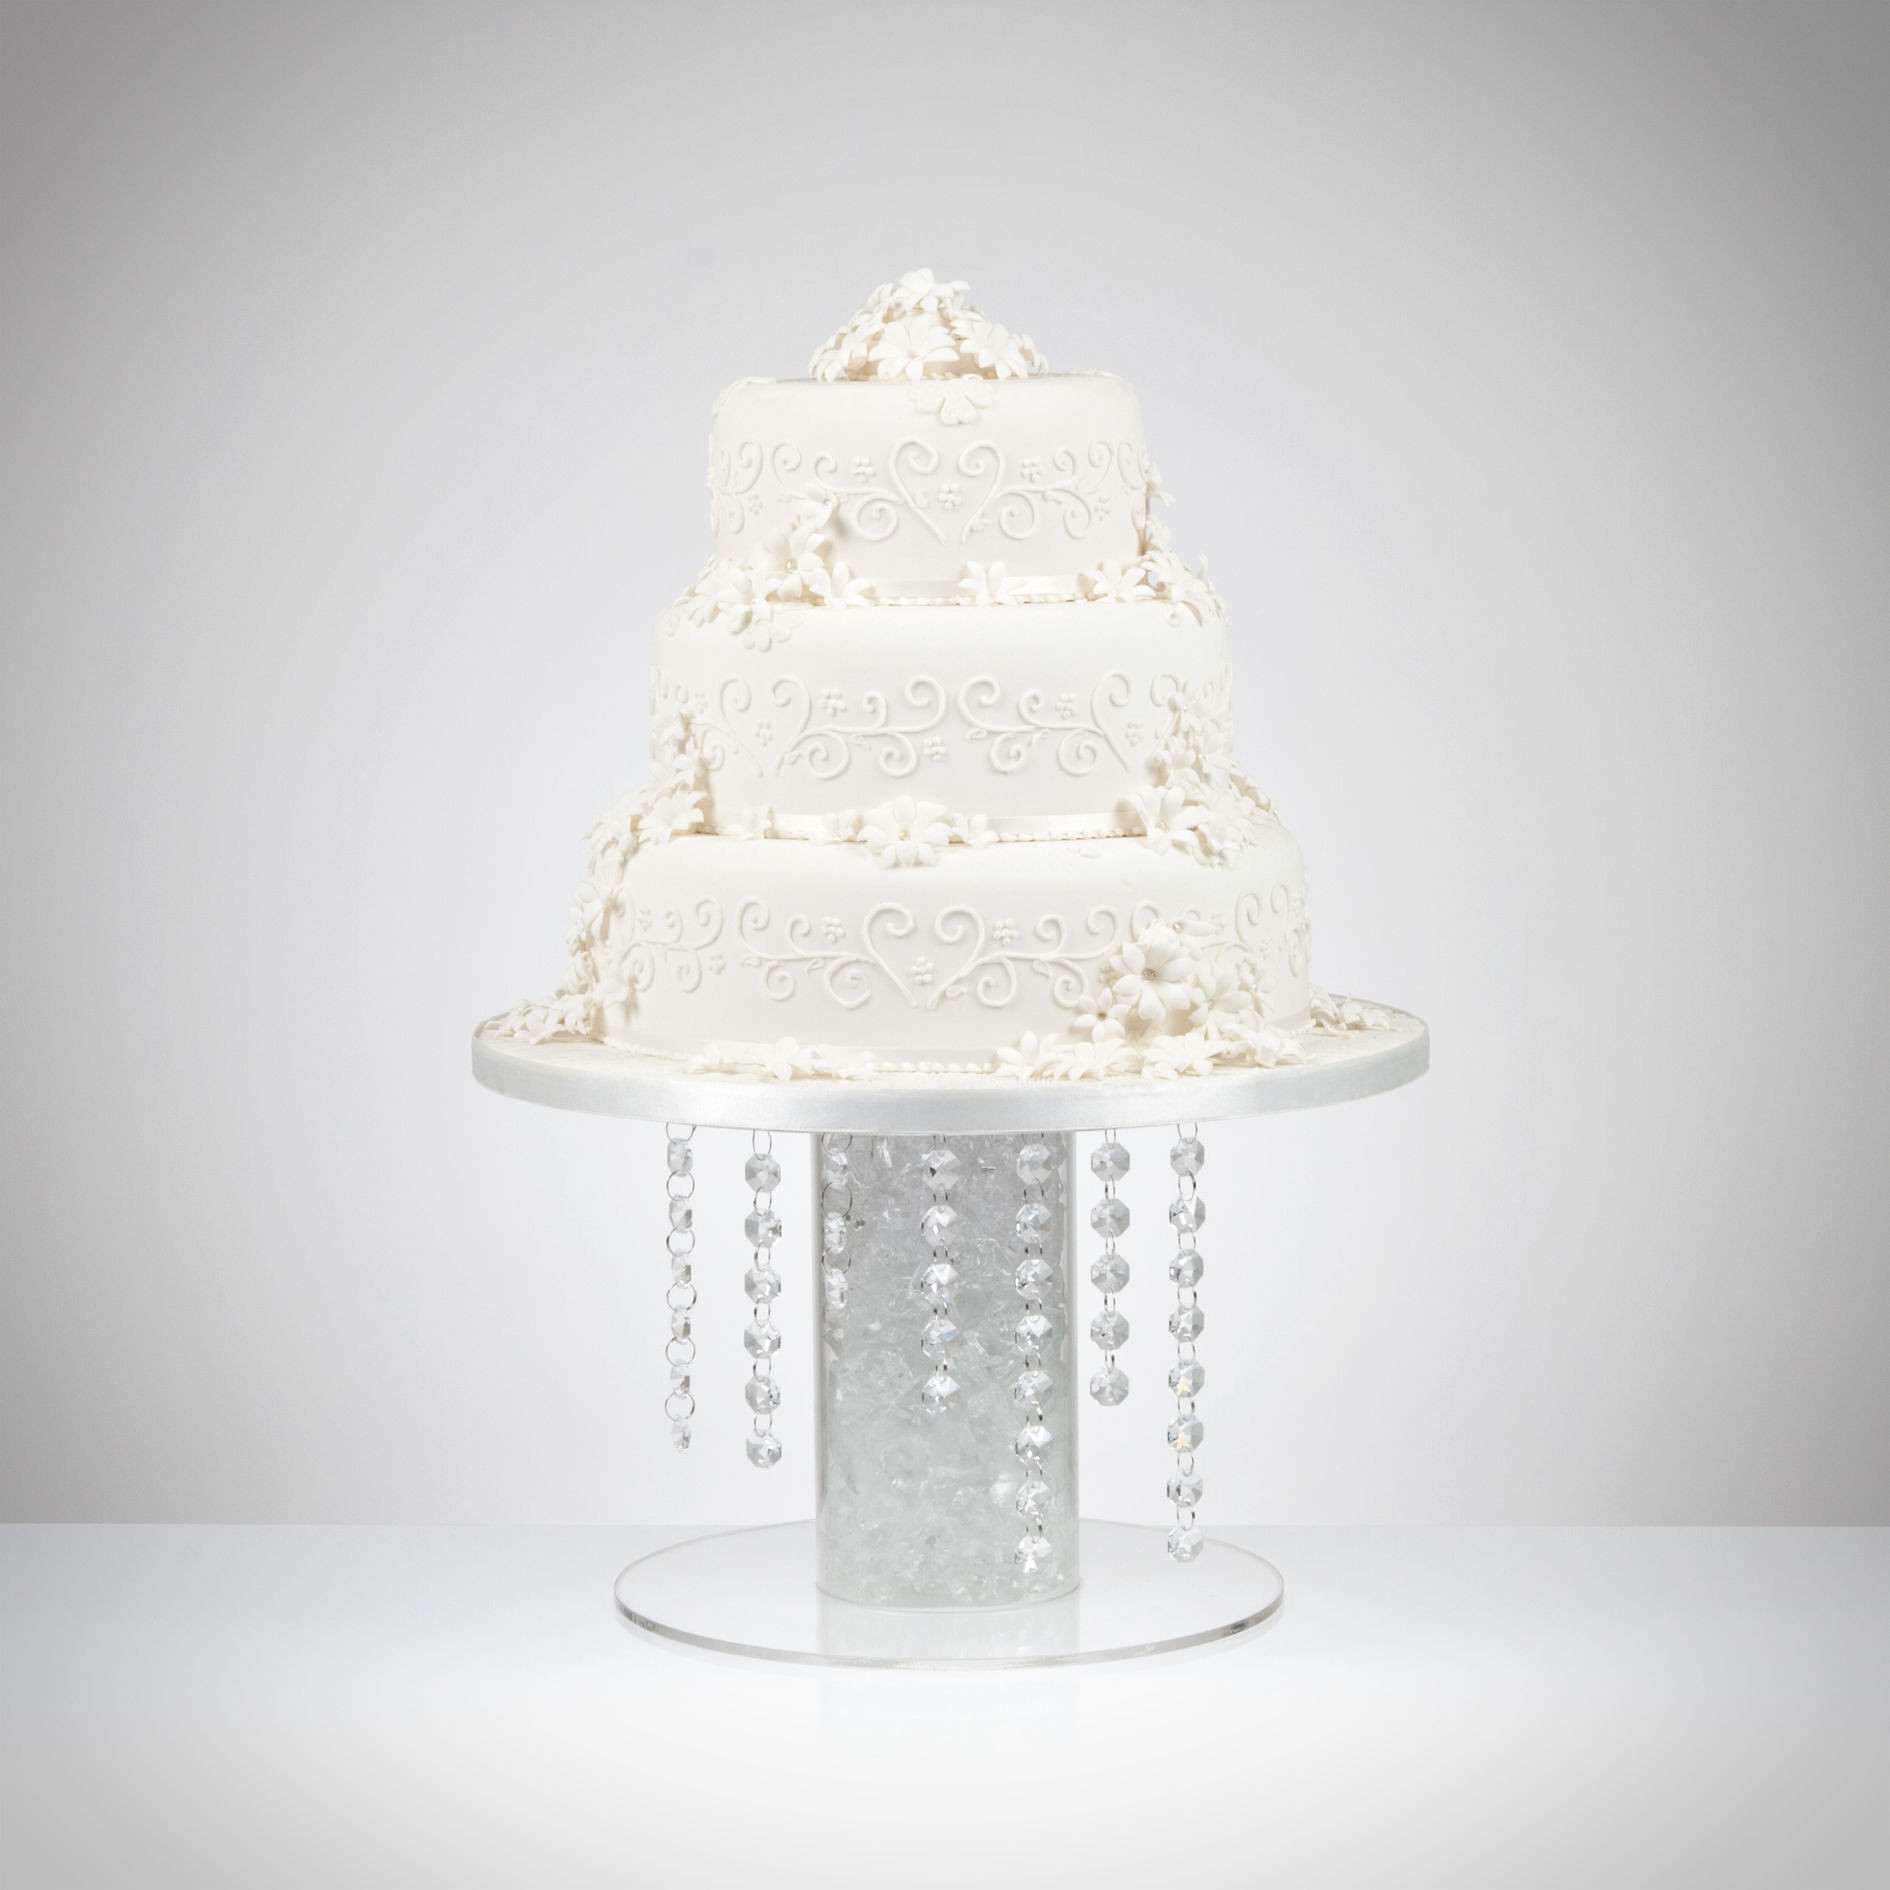 Bling Wedding Cake Stand
 Round Bling Wedding Cake Stands